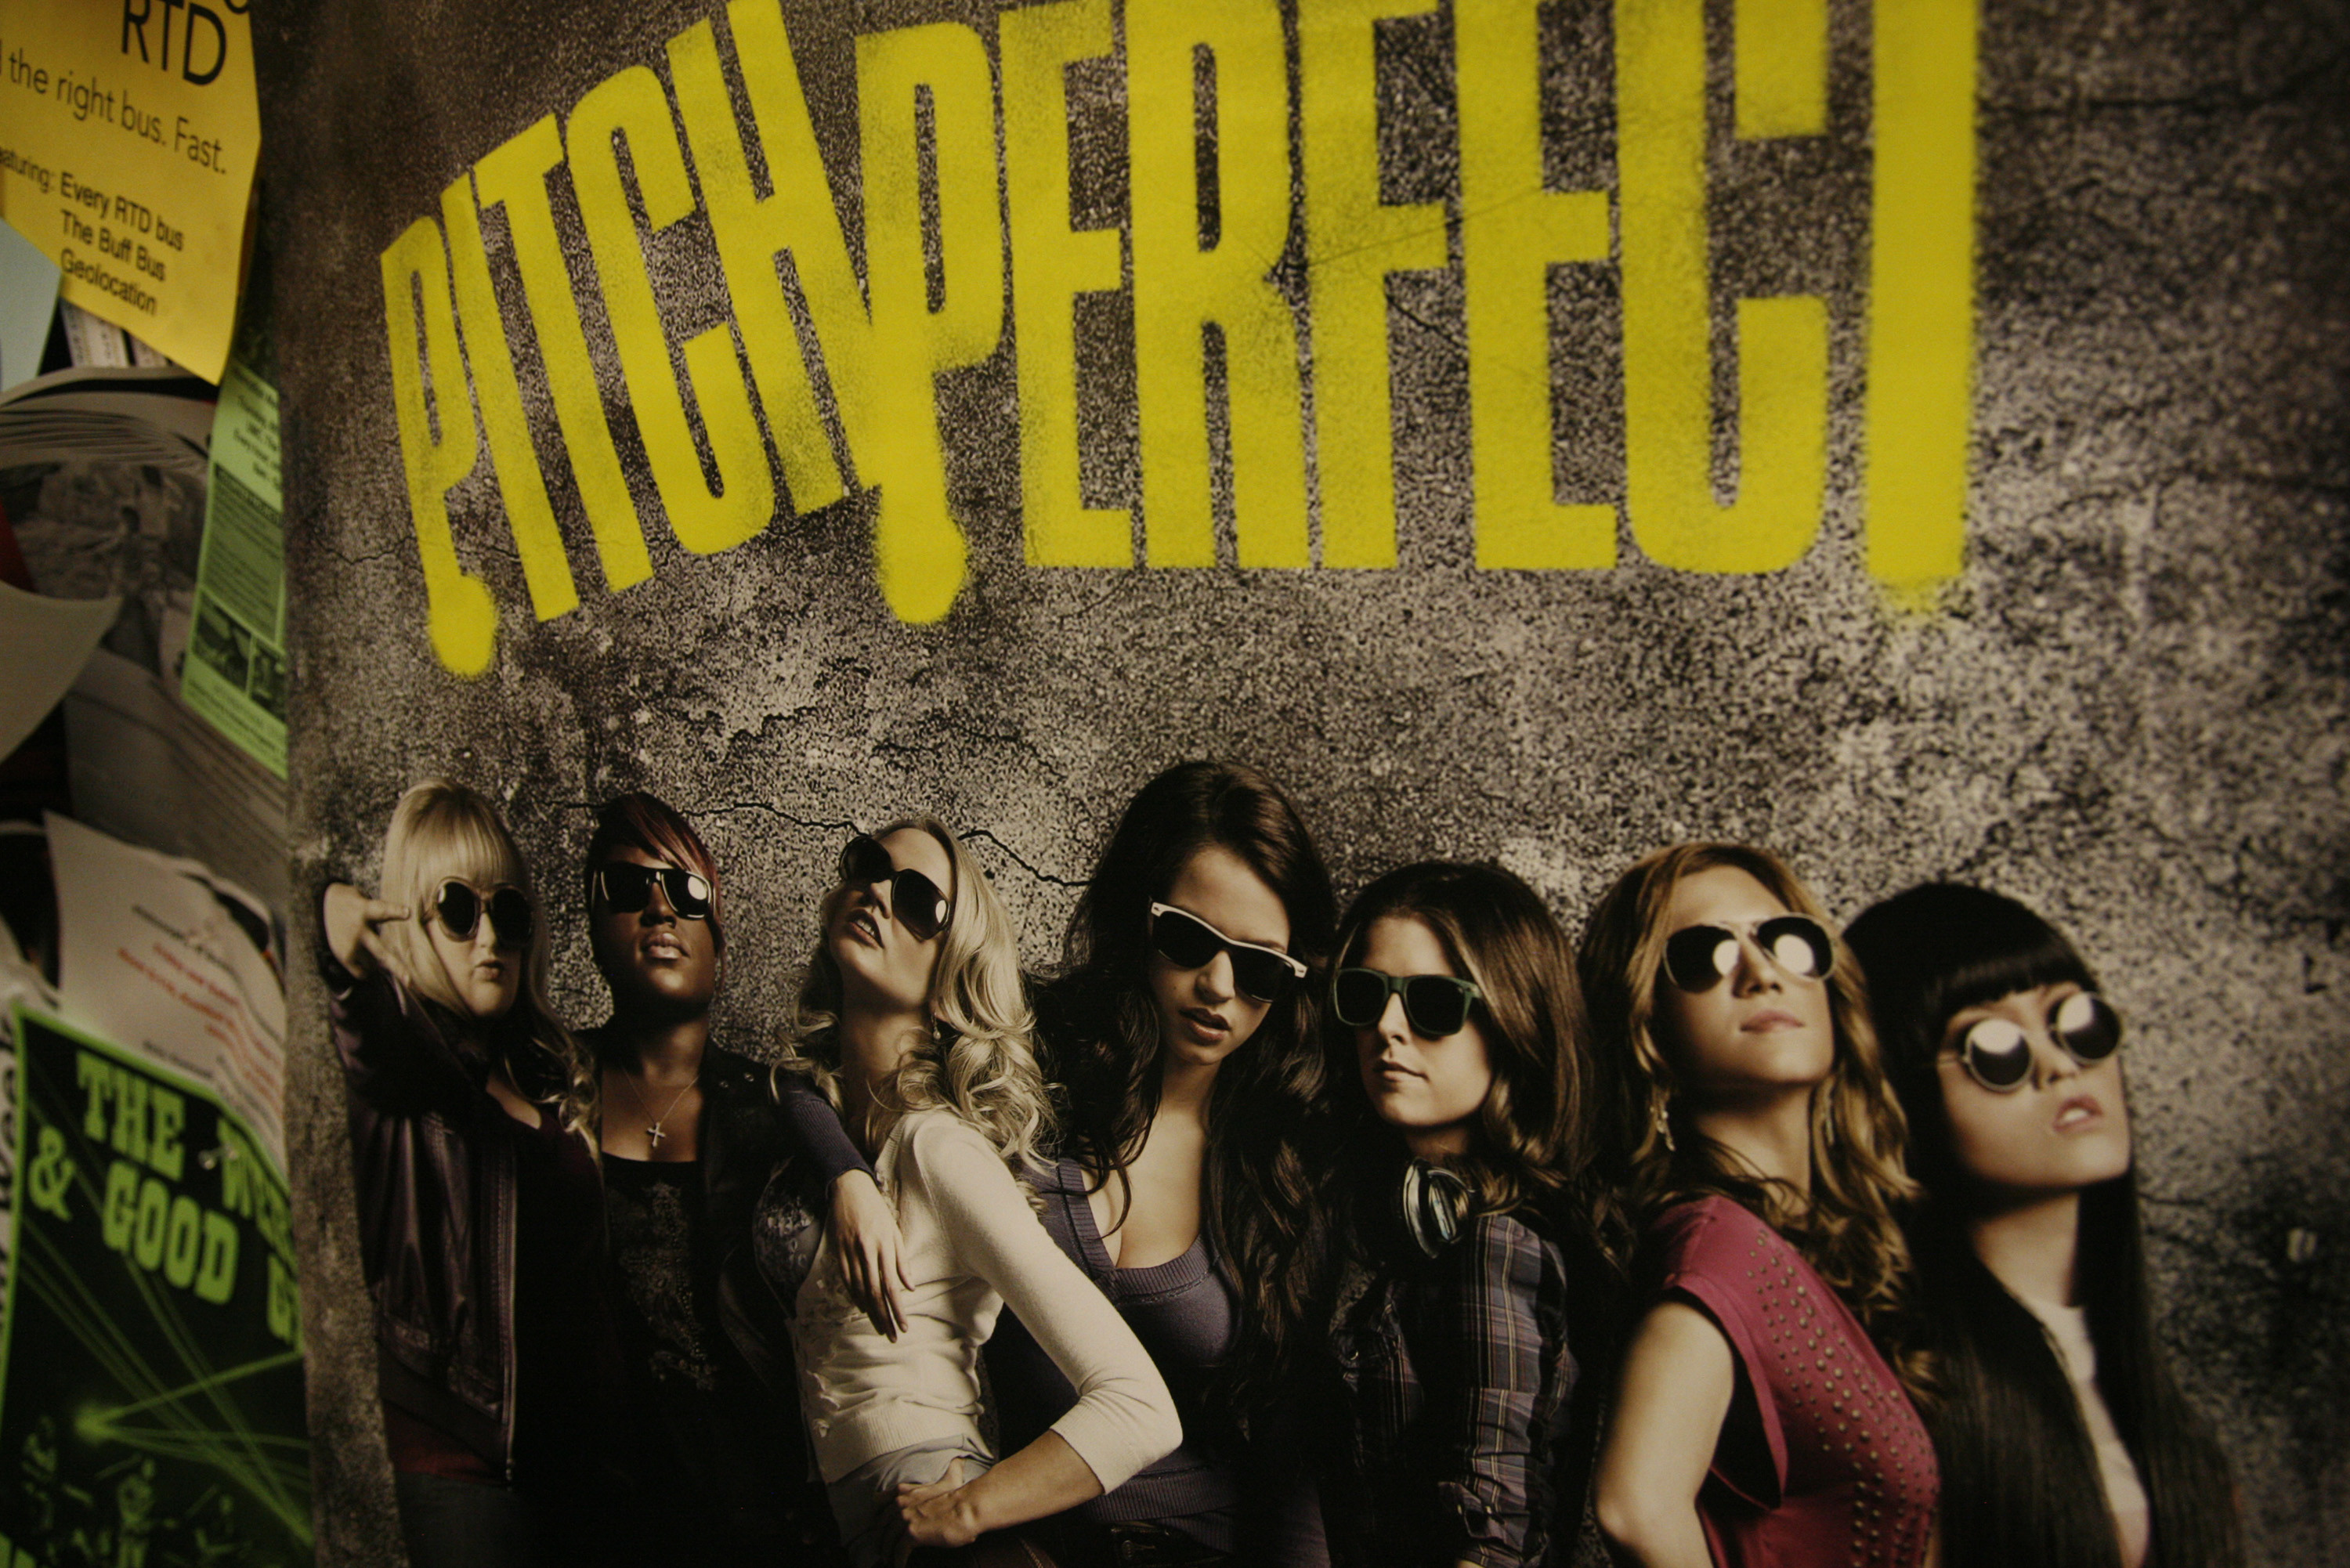 3000x2002 pitch perfect | pitch perfect hd wallpapers hd wallpapers pitch perfect hd  wallpapers .